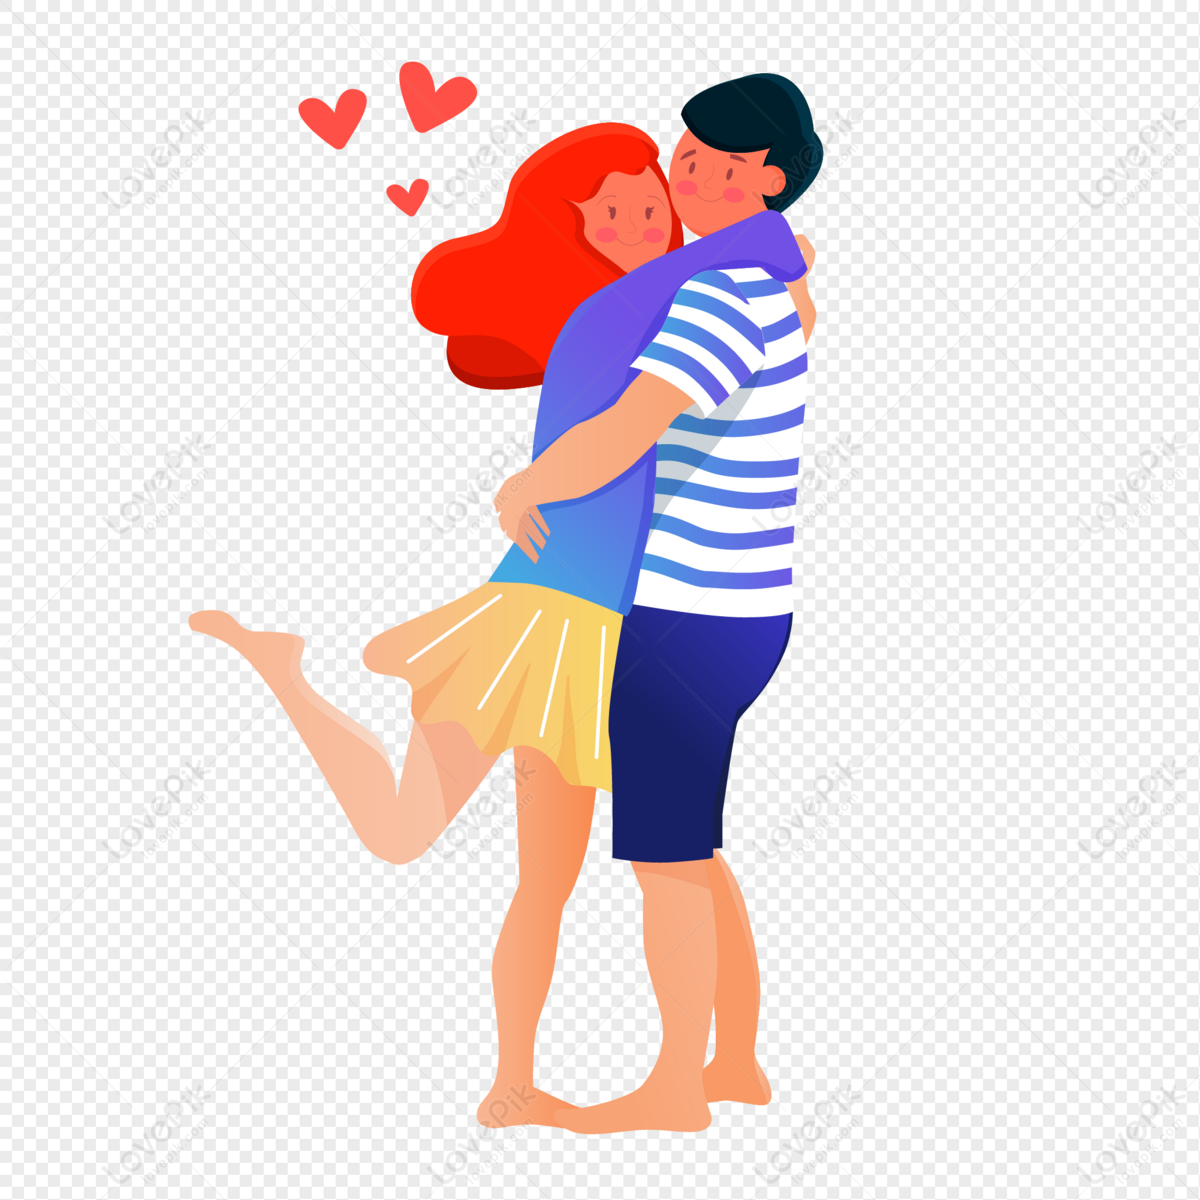 Cartoon Character Hugs Decorative Material Pattern Free PNG And Clipart  Image For Free Download - Lovepik | 401148219